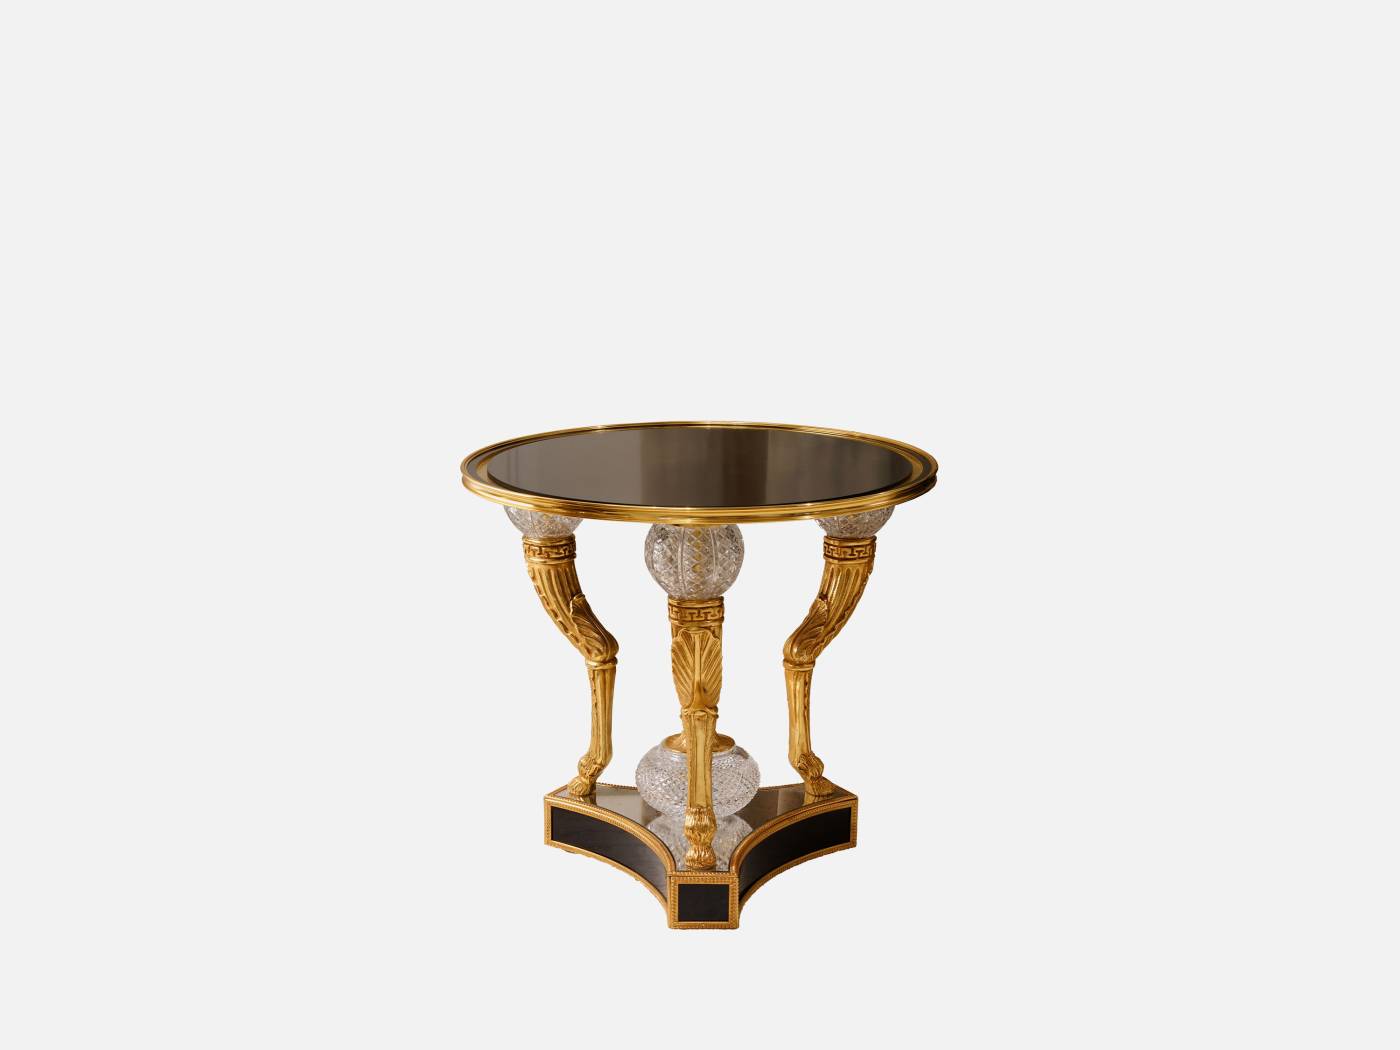 ART. 2212 – Discover the elegance of luxury classic Small tables made in Italy by C.G. Capelletti. Luxury classic furniture that combines style and craftsmanship.